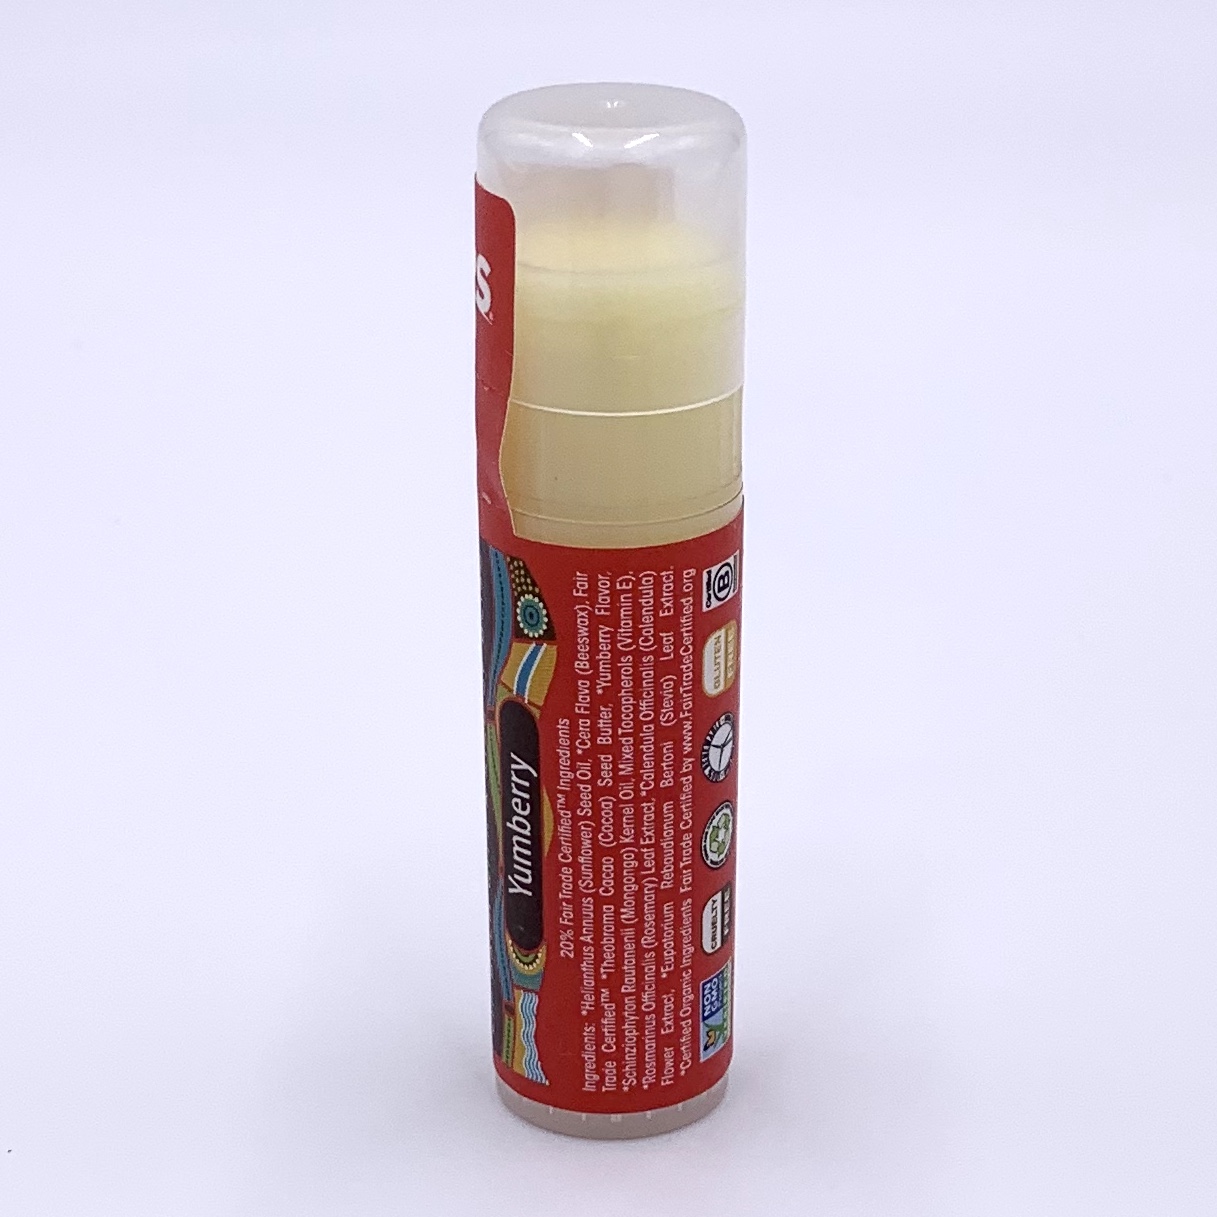 EcoLips Yumberry Lip Balm Back for Cocotique July 2020